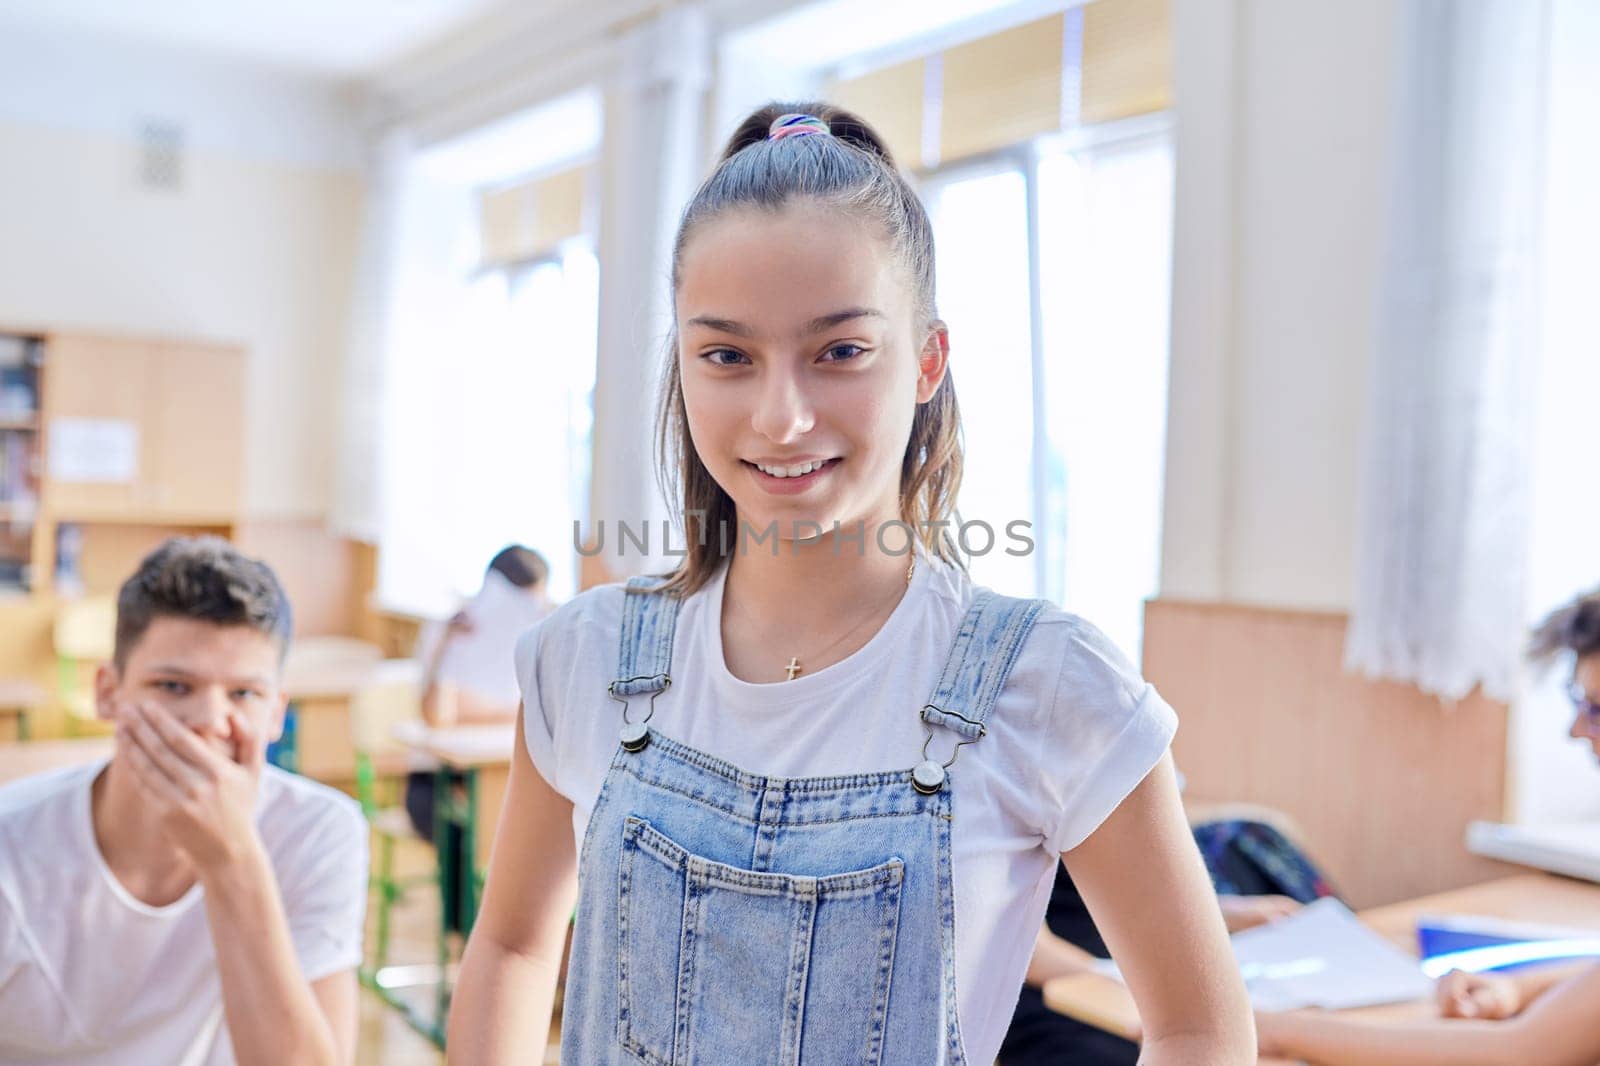 Teenage student taking exam, talking looking at camera, classroom with study students background. School, education, youth concept